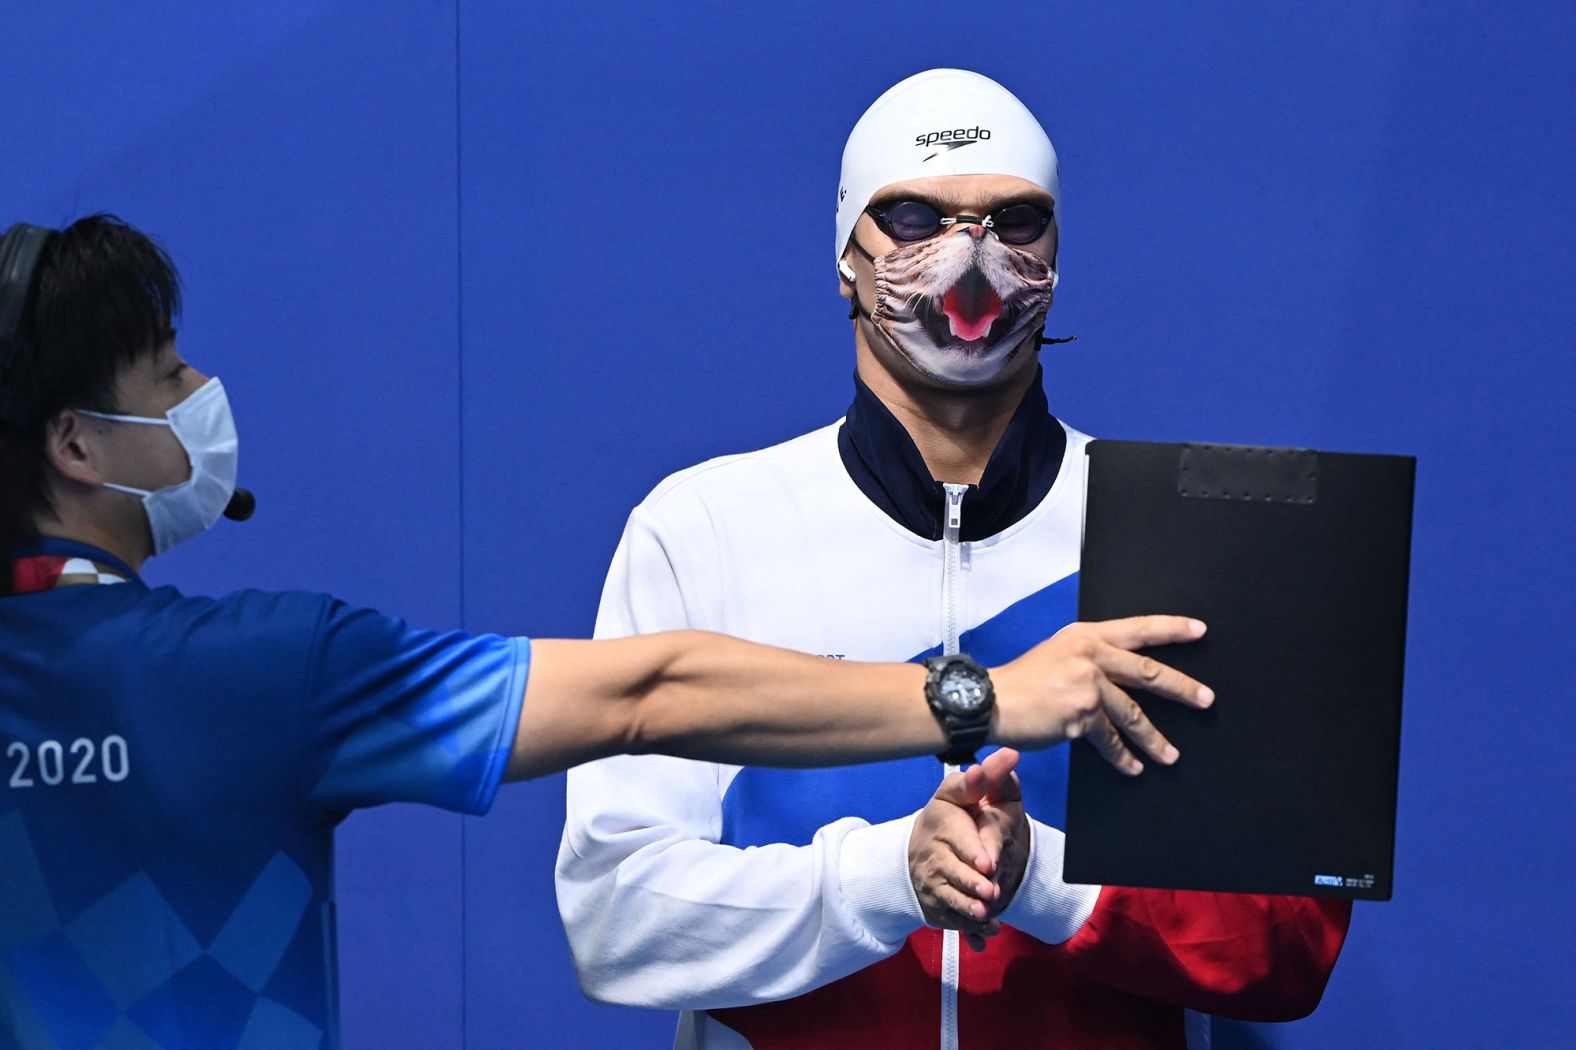 Russian swimmer Evgeny Rylov wears a cat-themed mask as he waits to receive his gold medal on July 27. <a href="index.php?page=&url=https%3A%2F%2Fwww.cnn.com%2Fworld%2Flive-news%2Ftokyo-2020-olympics-07-26-21-spt%2Fh_ca80c586169141bbb5c36a560e96b1cf" target="_blank">Rylov won the 100-meter backstroke.</a>